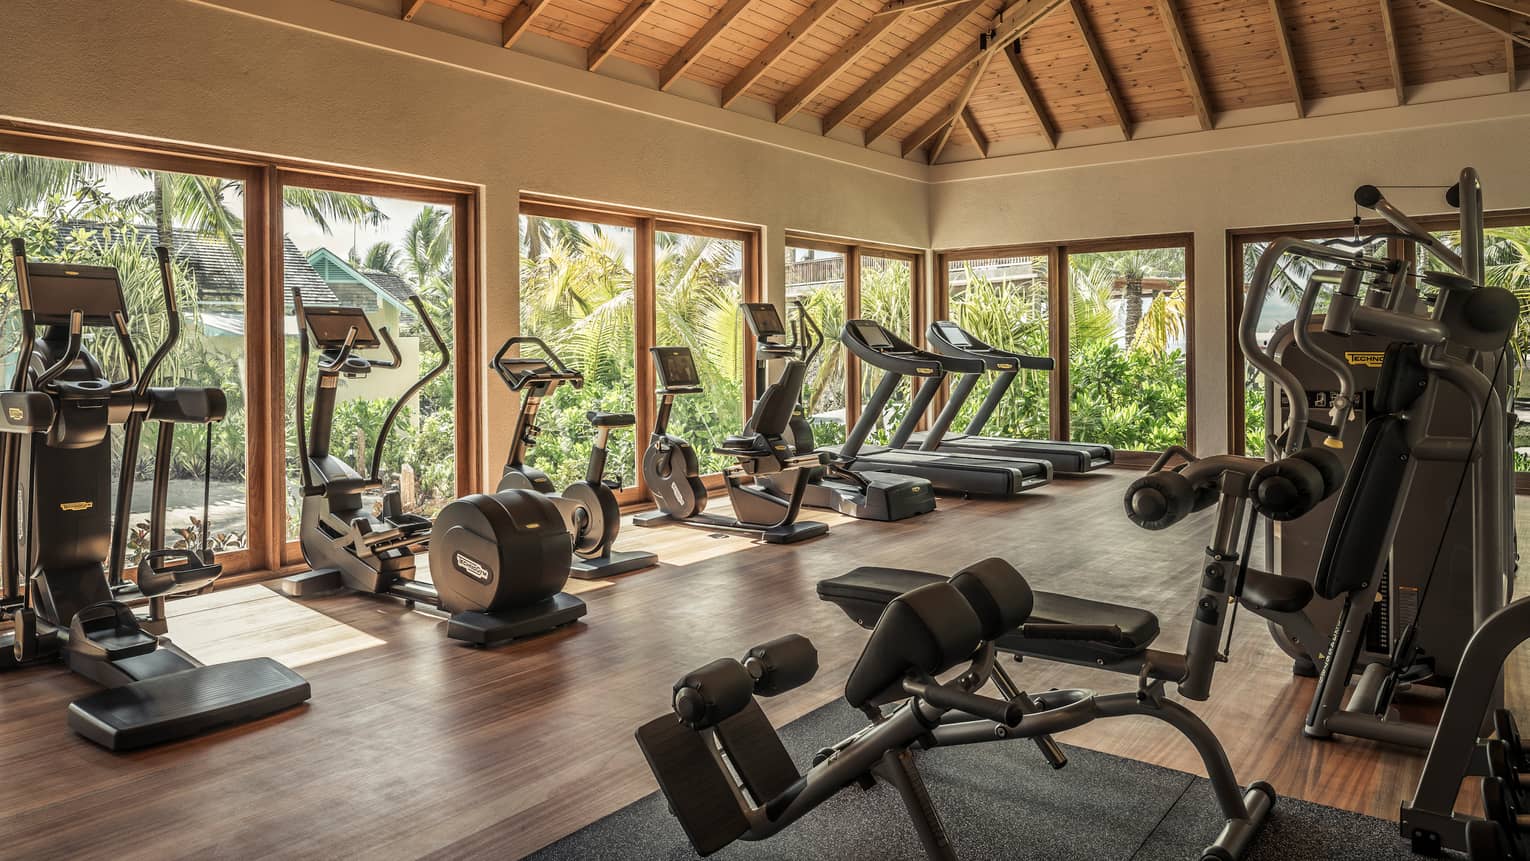 A bright, spacious gym with vaulted ceiling featuring various exercise machines and a view of lush palms from large windows.